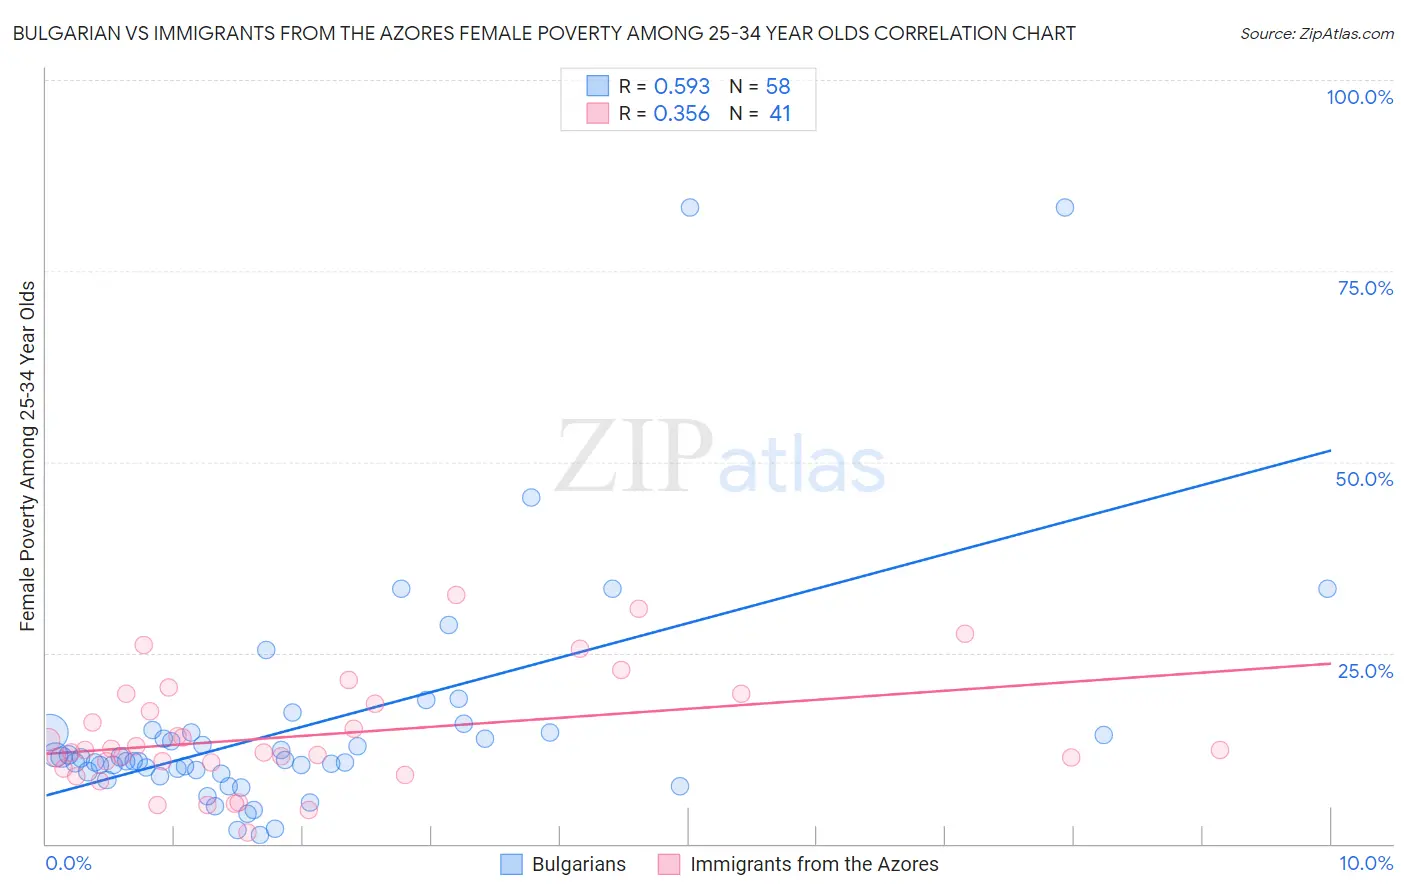 Bulgarian vs Immigrants from the Azores Female Poverty Among 25-34 Year Olds